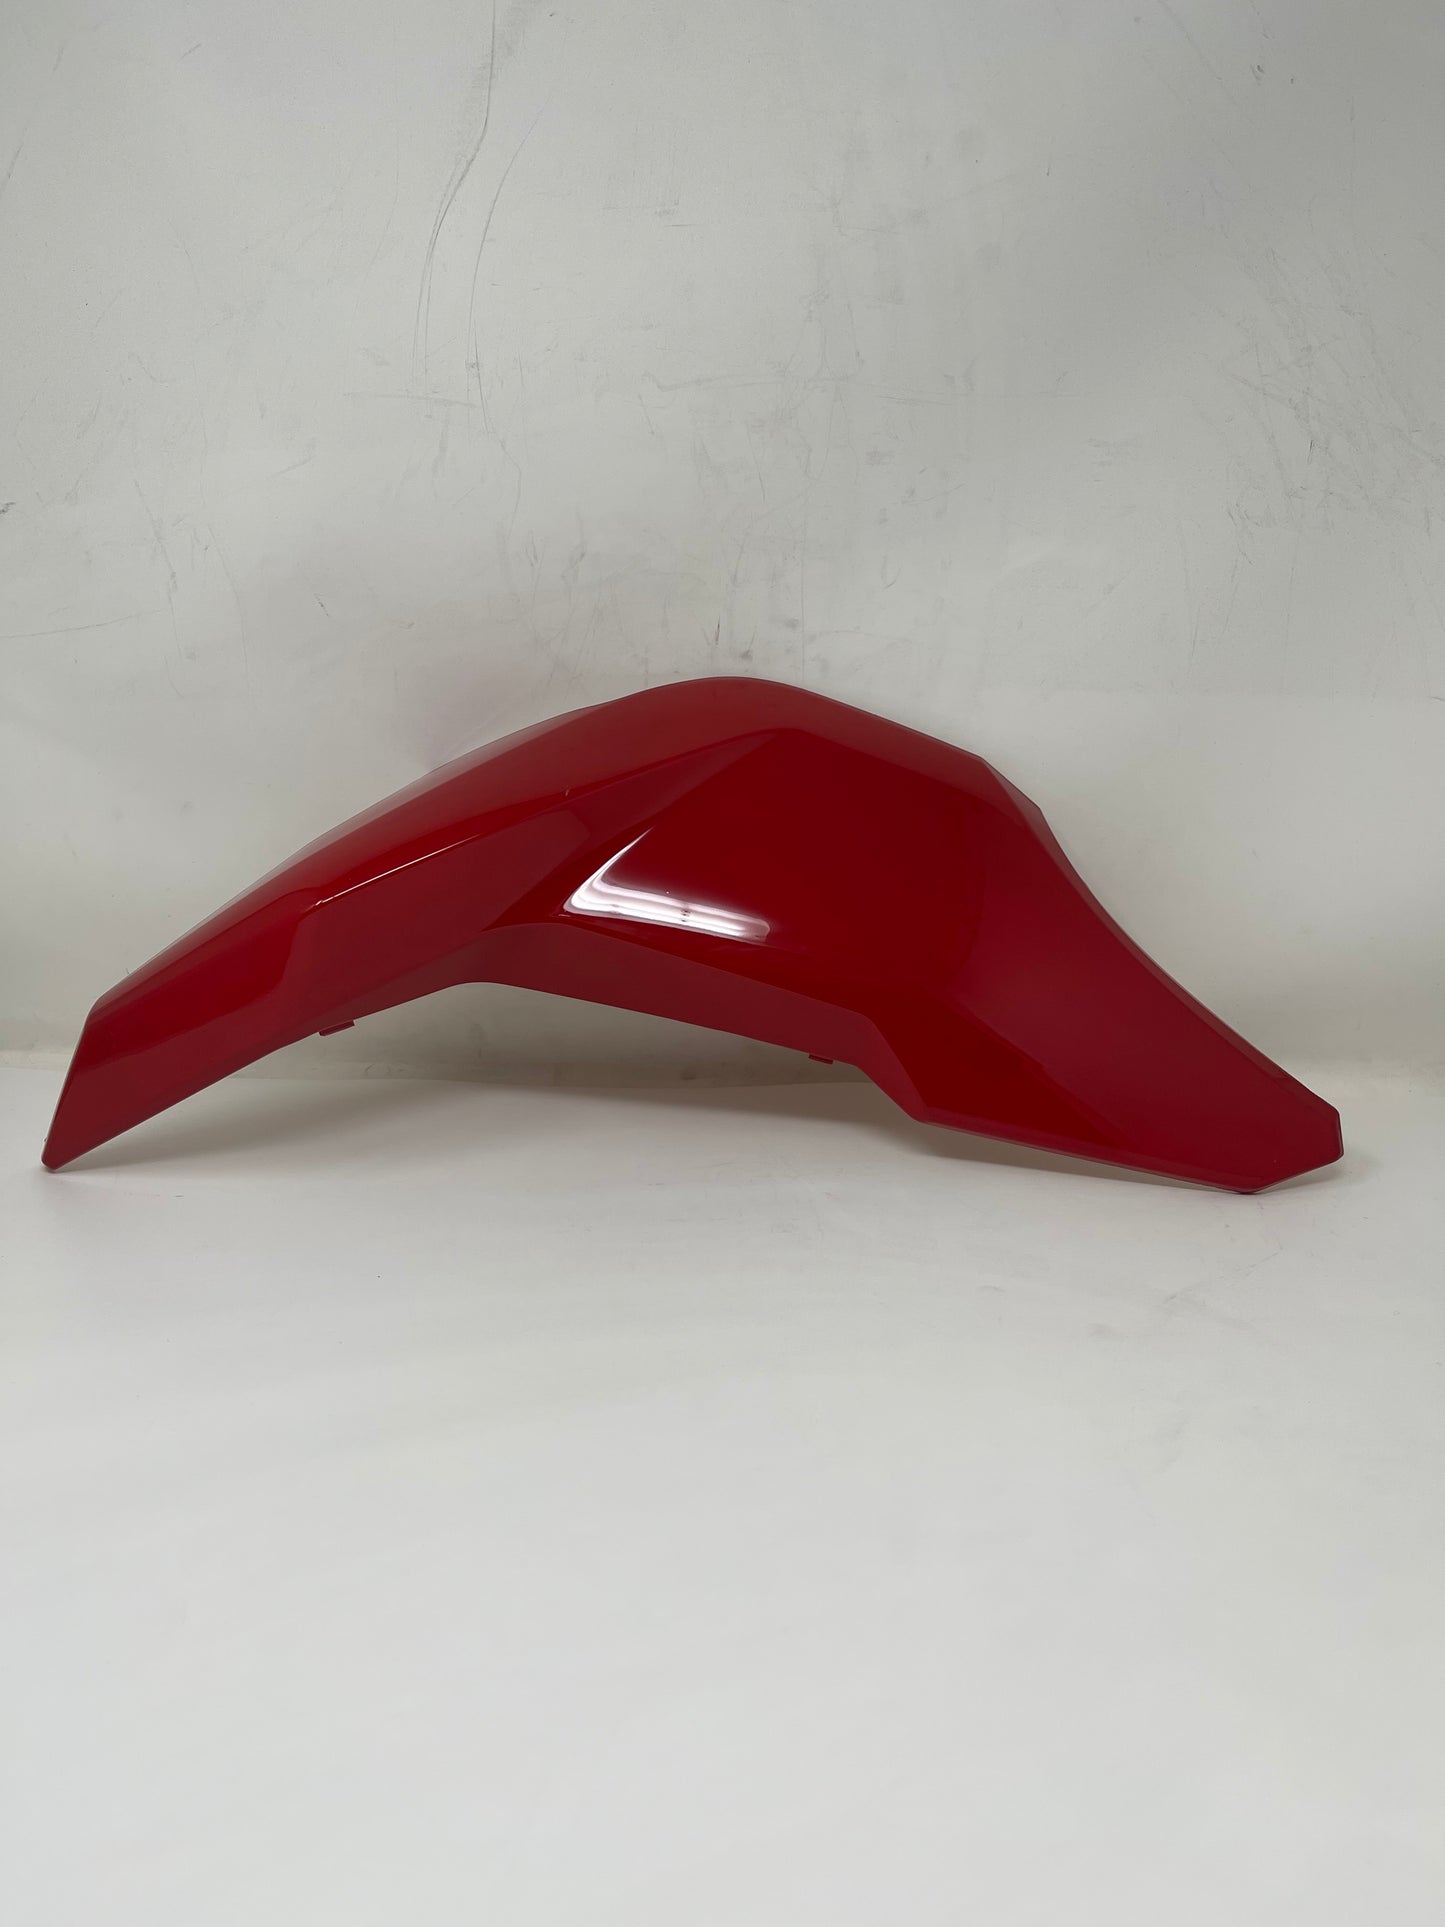 Left fuel tank cover for BD125-10 in red. Part #125010009